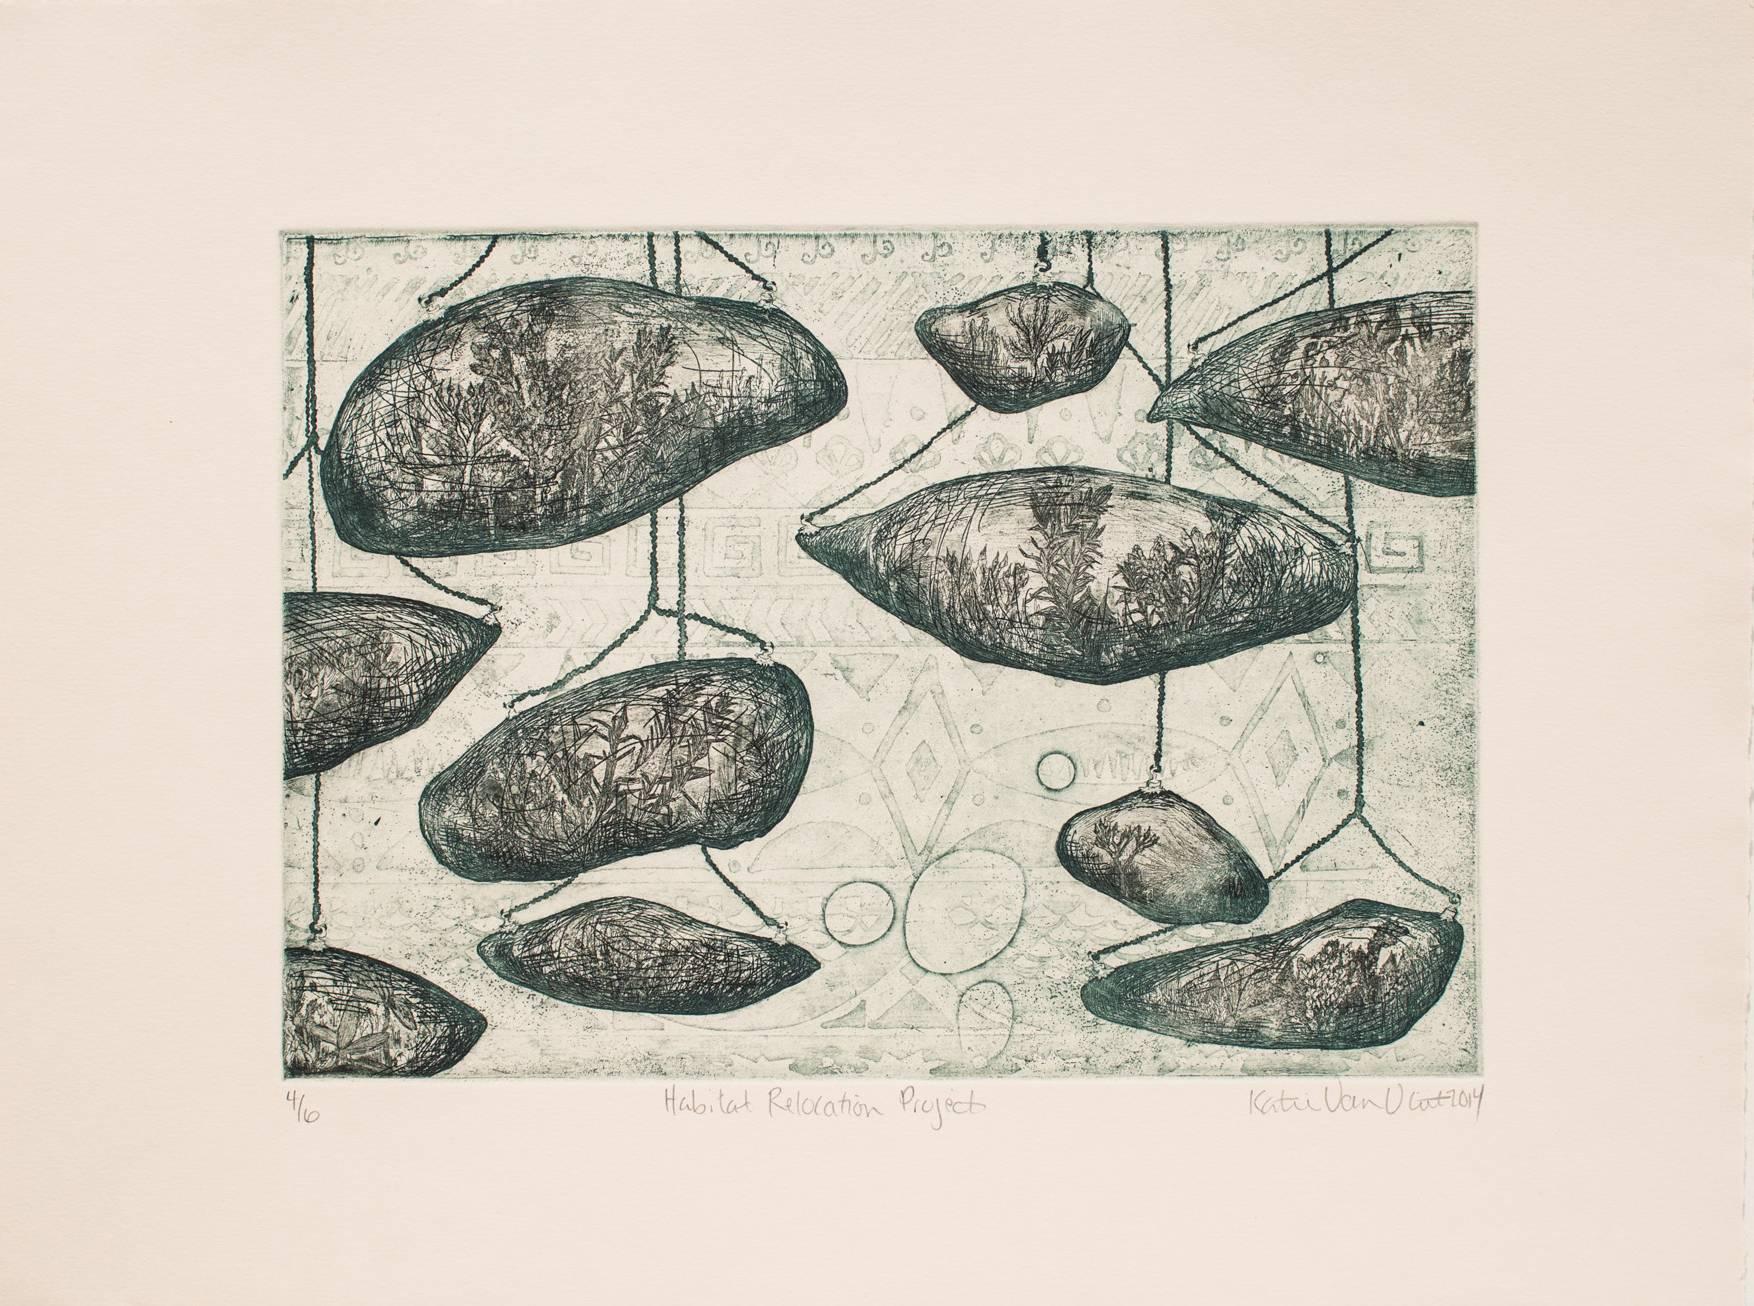 "Habitat Relocation Project" Etching on archival paper, botanical, floral